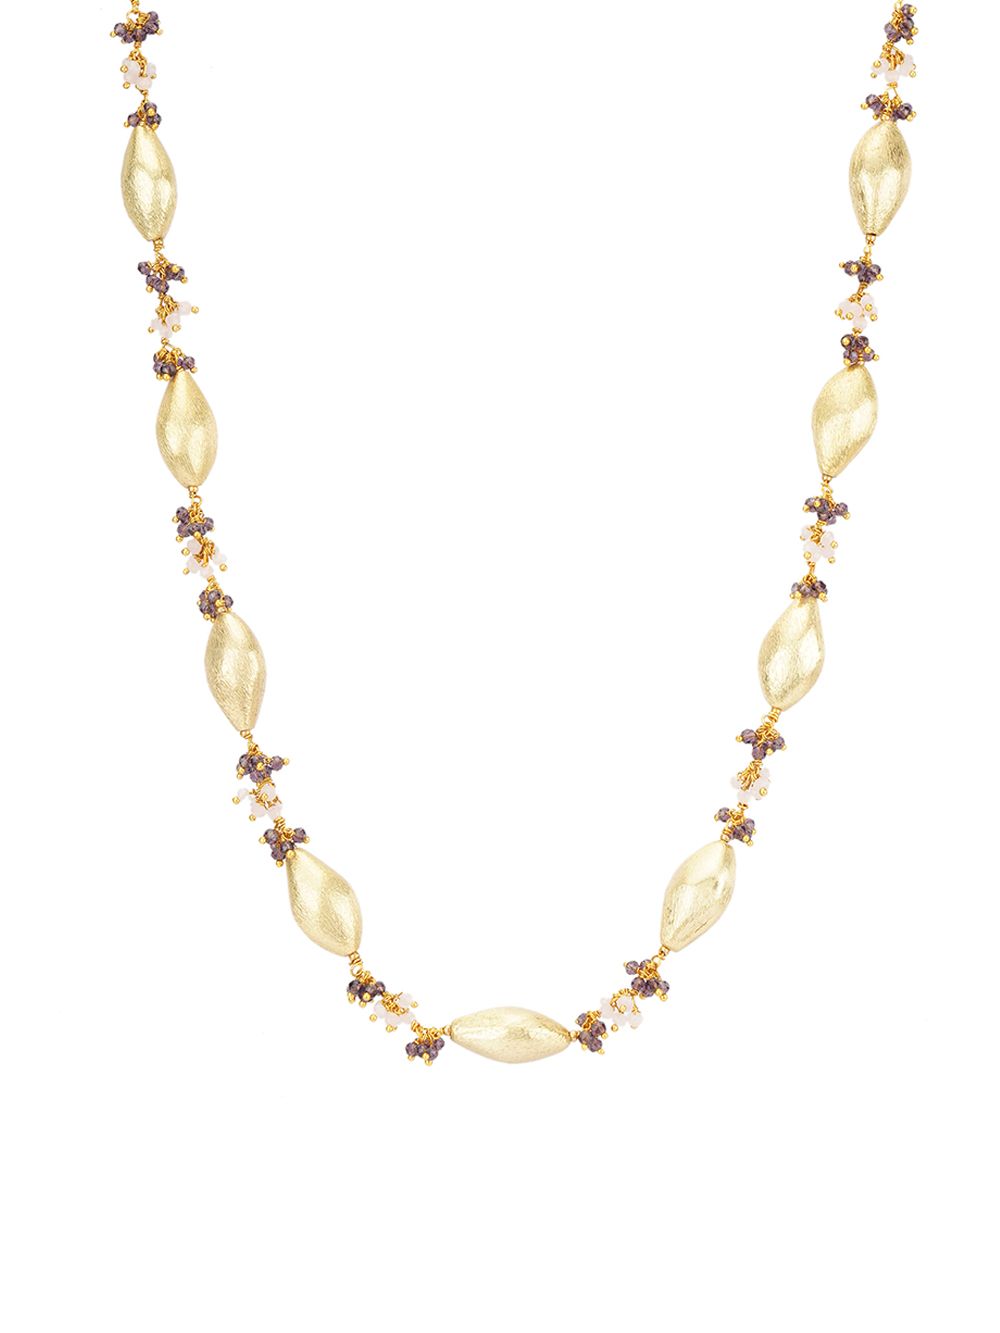 Matte Gold Handcrafted Beaded Necklace